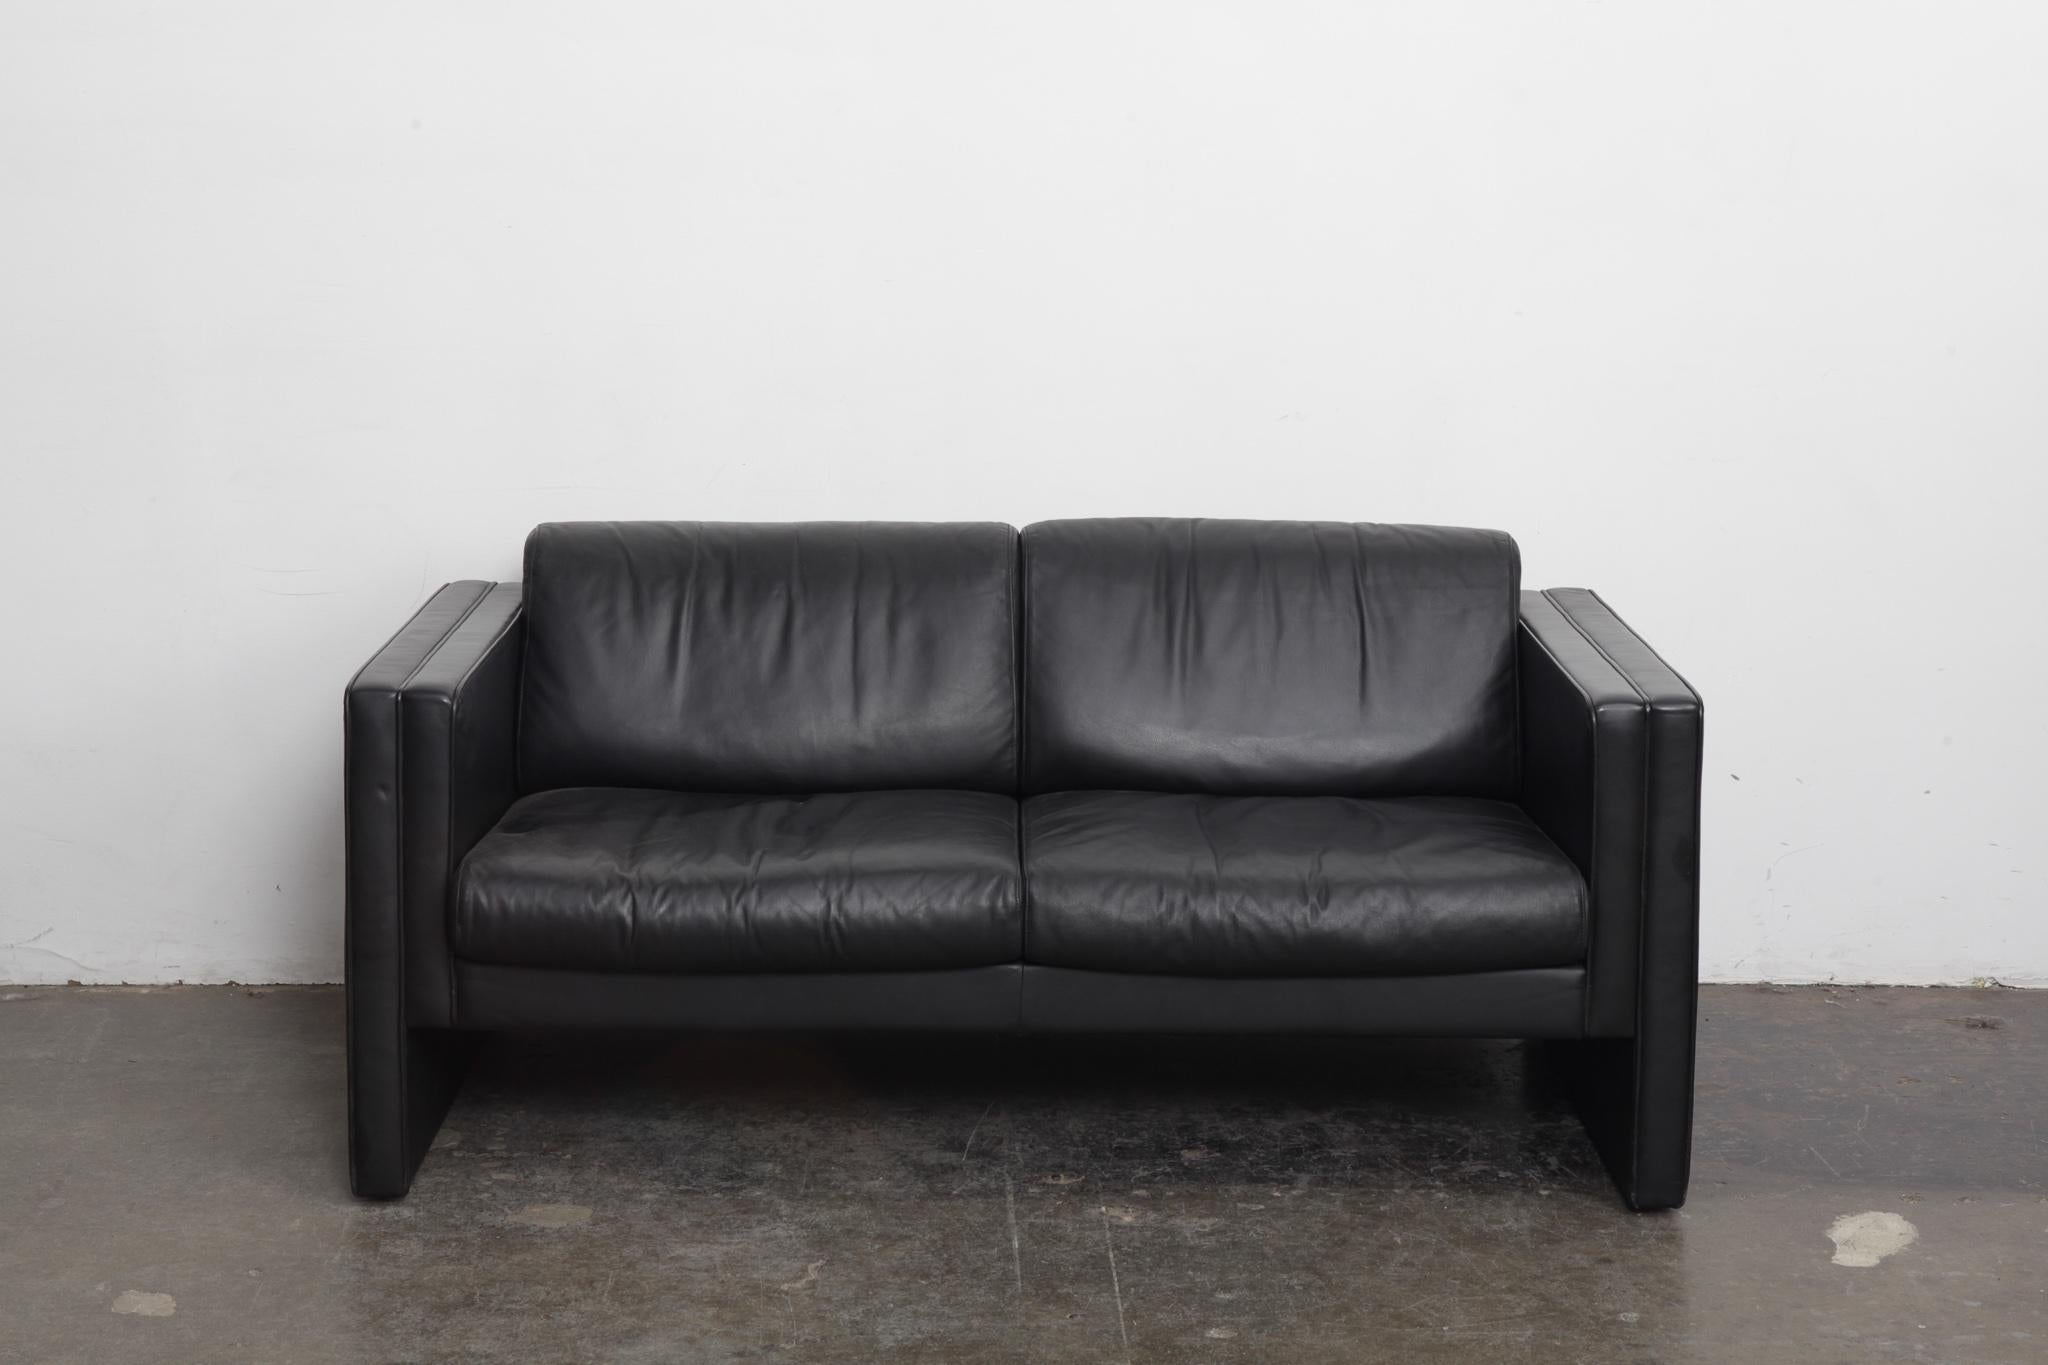 2 seat black leather sofa in original leather, model Studio 190, designed by Jürgen Lange and produced by Walter Knoll, Germany, 1975 as part of their Studio Line Series. Measures: Seat depth is 19.5”.